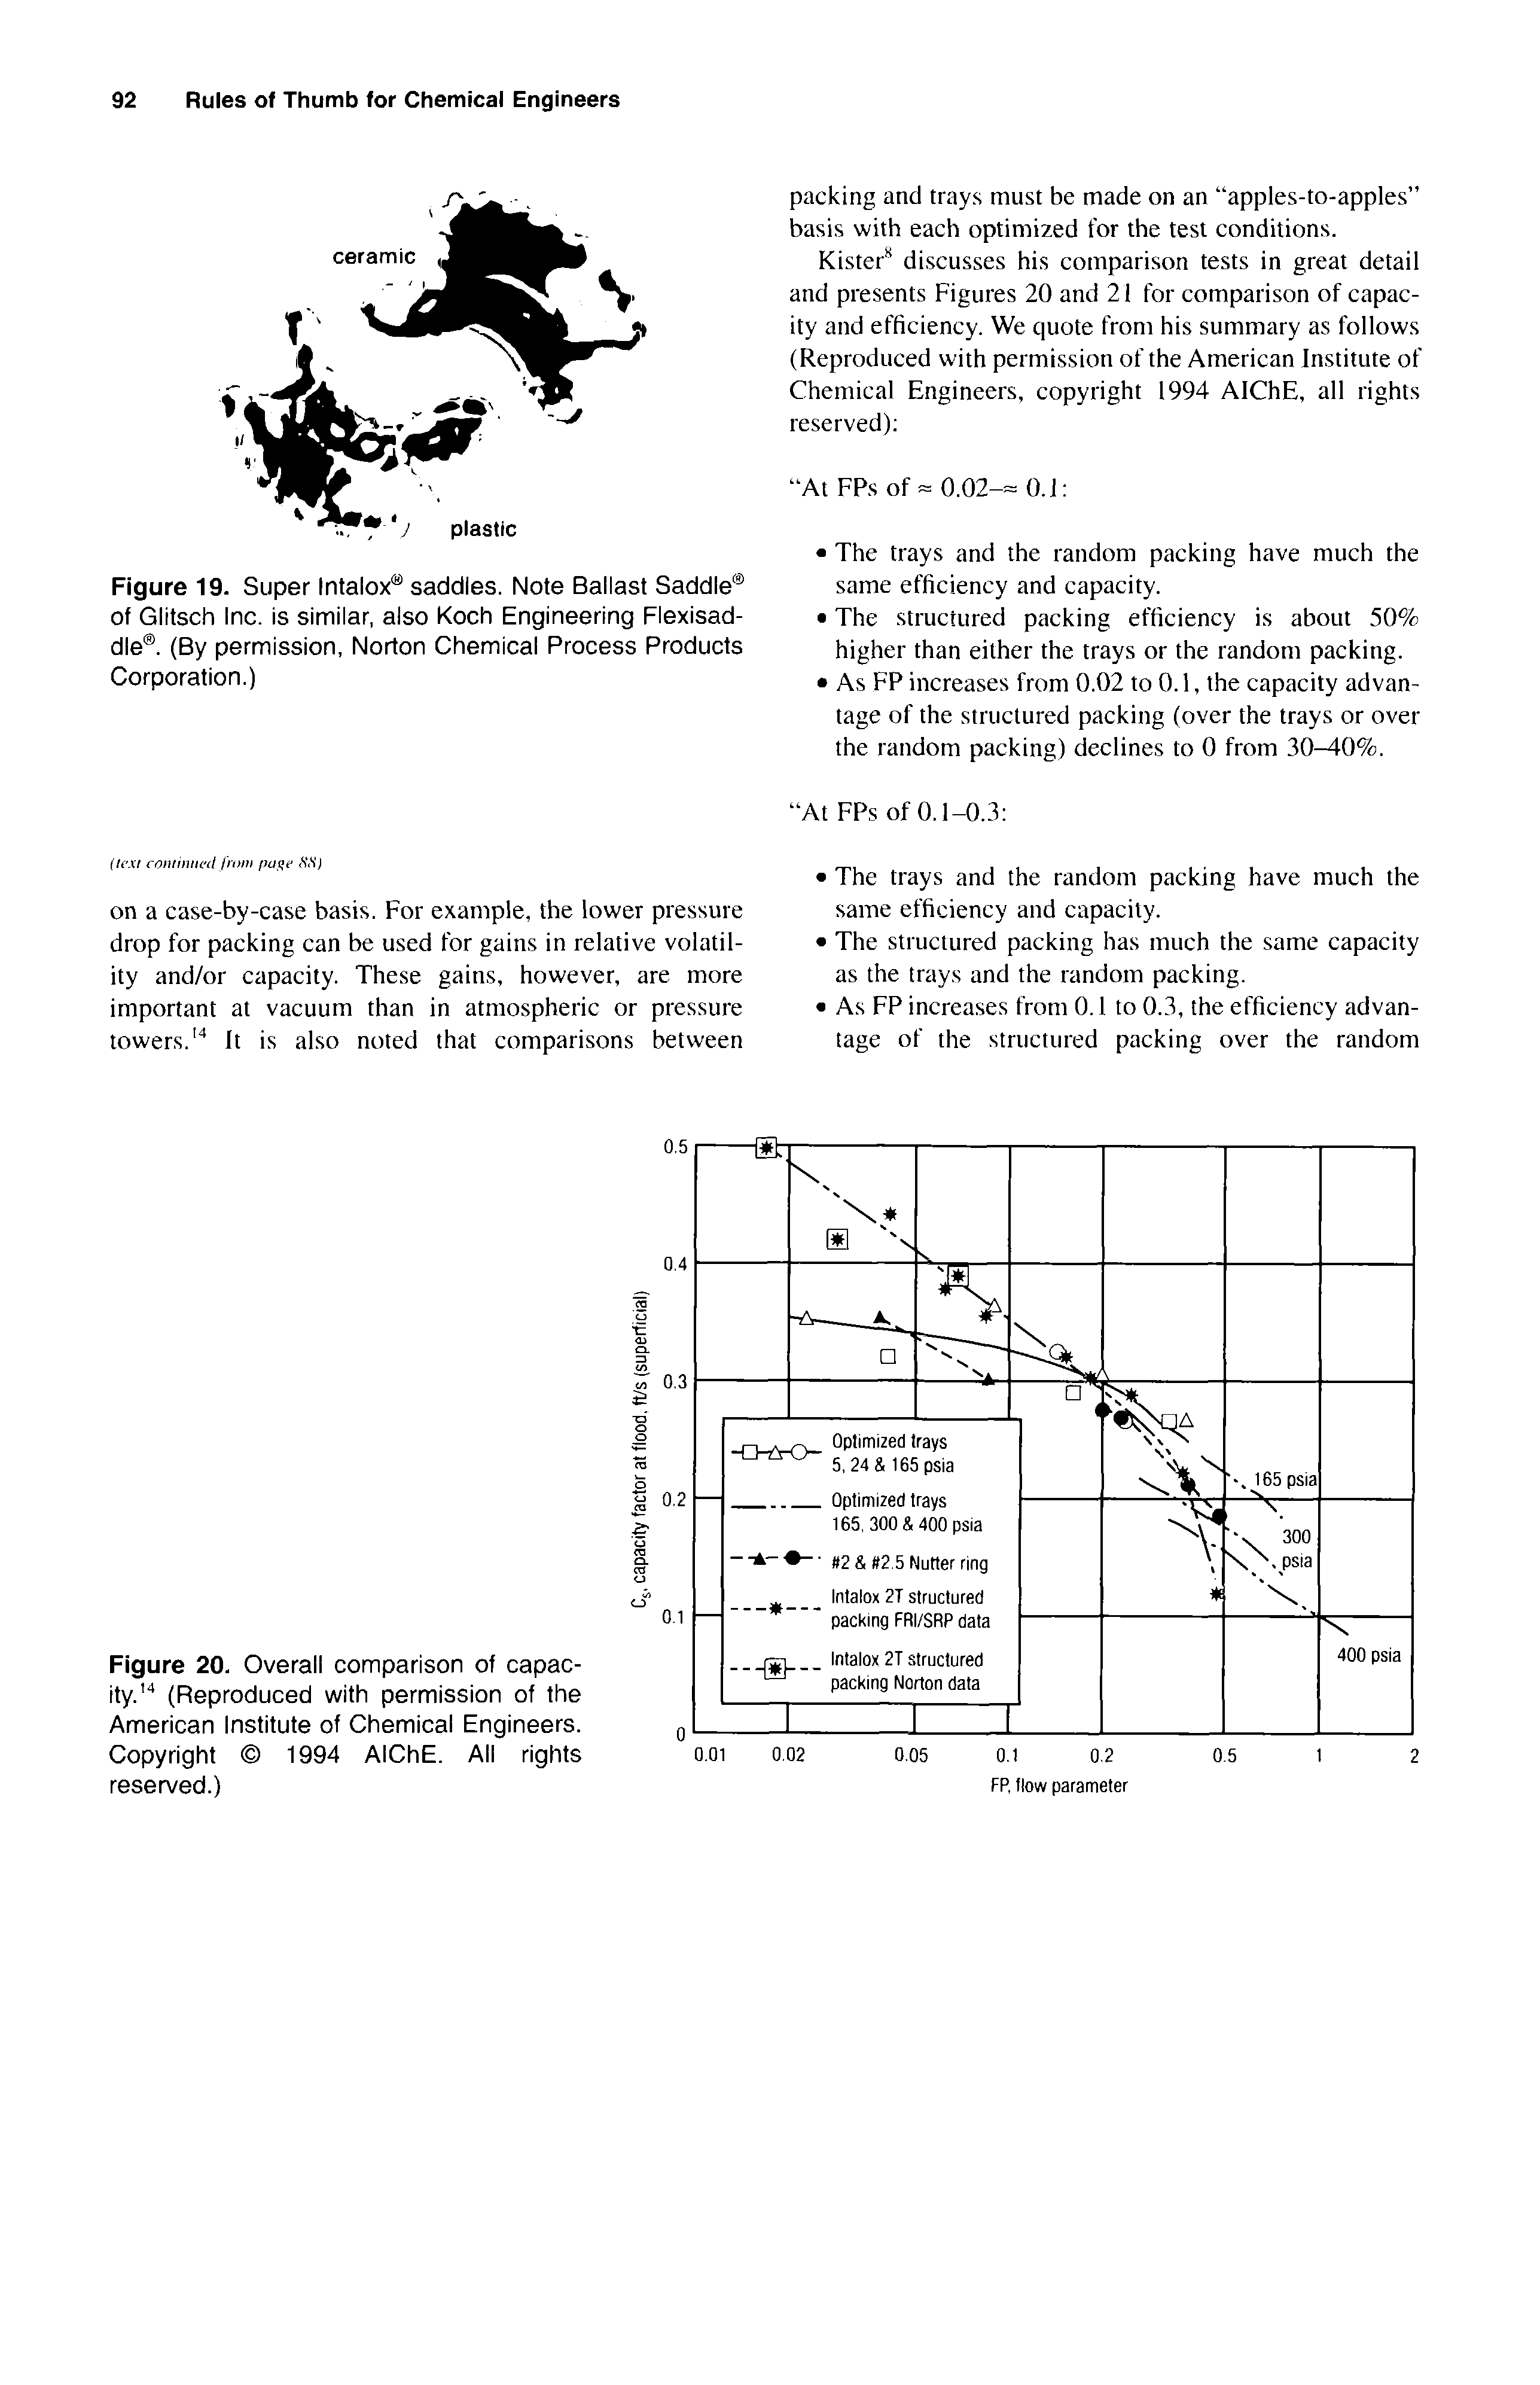 Figure 20. Overall comparison of capacity. (Reproduced with permission of the American Institute of Chemical Engineers. Copyright 1994 AlChE. All rights reserved.)...